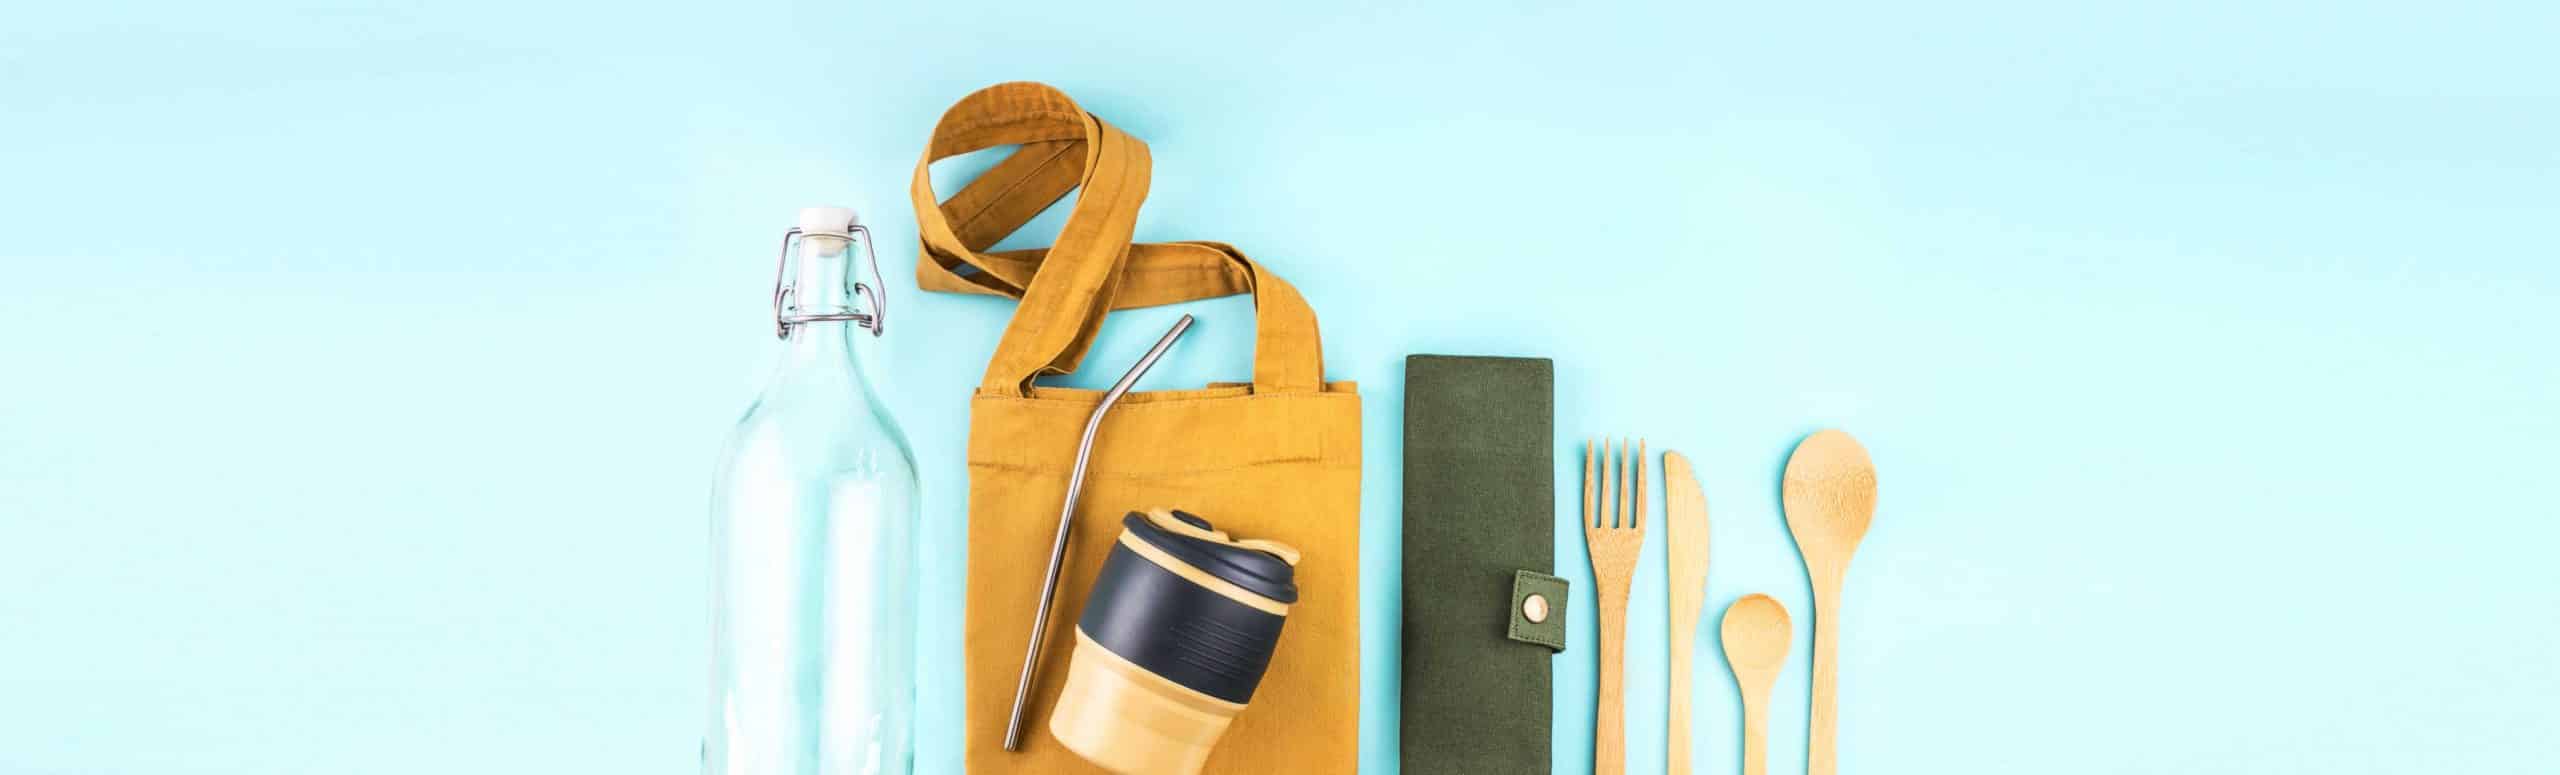 Reusable kitchen items layed against a light blue background